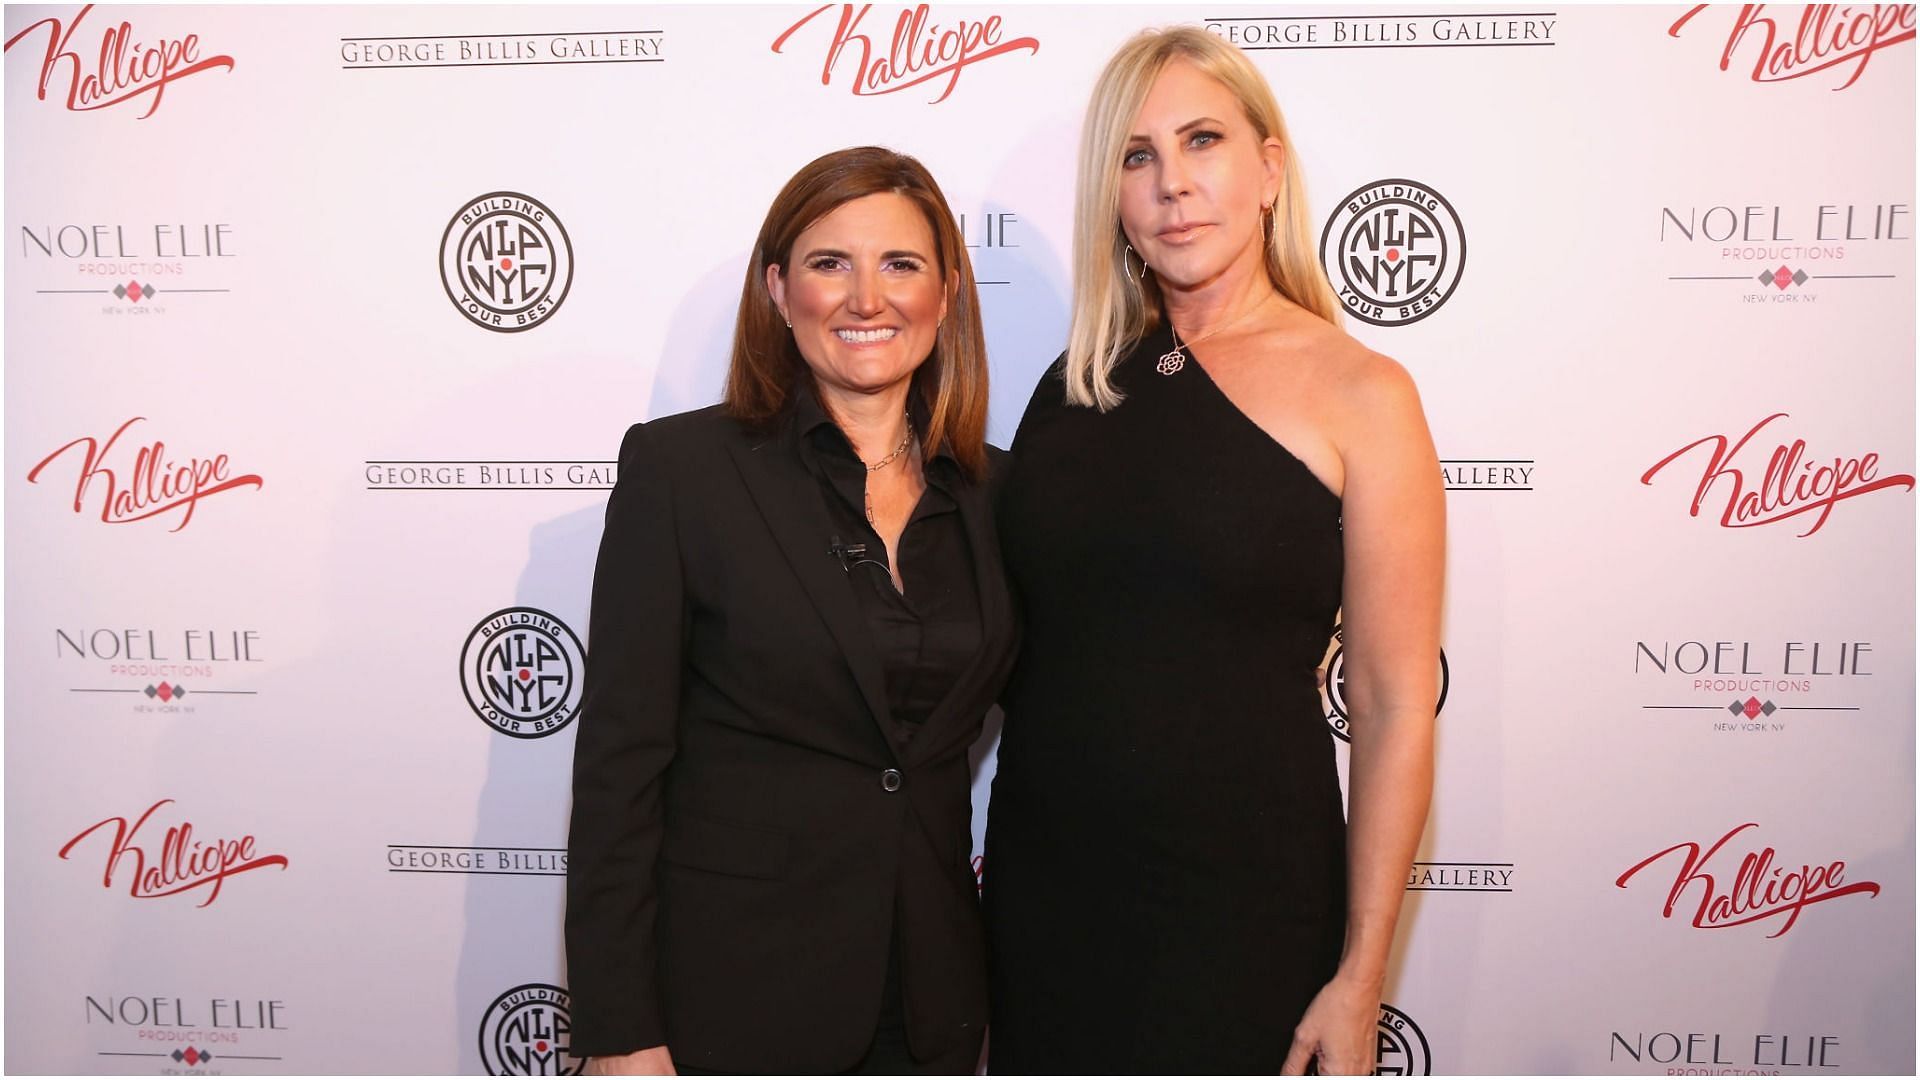 Kalliope Barlis and Vicki Gunvalson attend Phobia Relief Day on November 5, 2018, in New York City (Image by Sylvain Gaboury/Patrick McMullan via Getty Images)